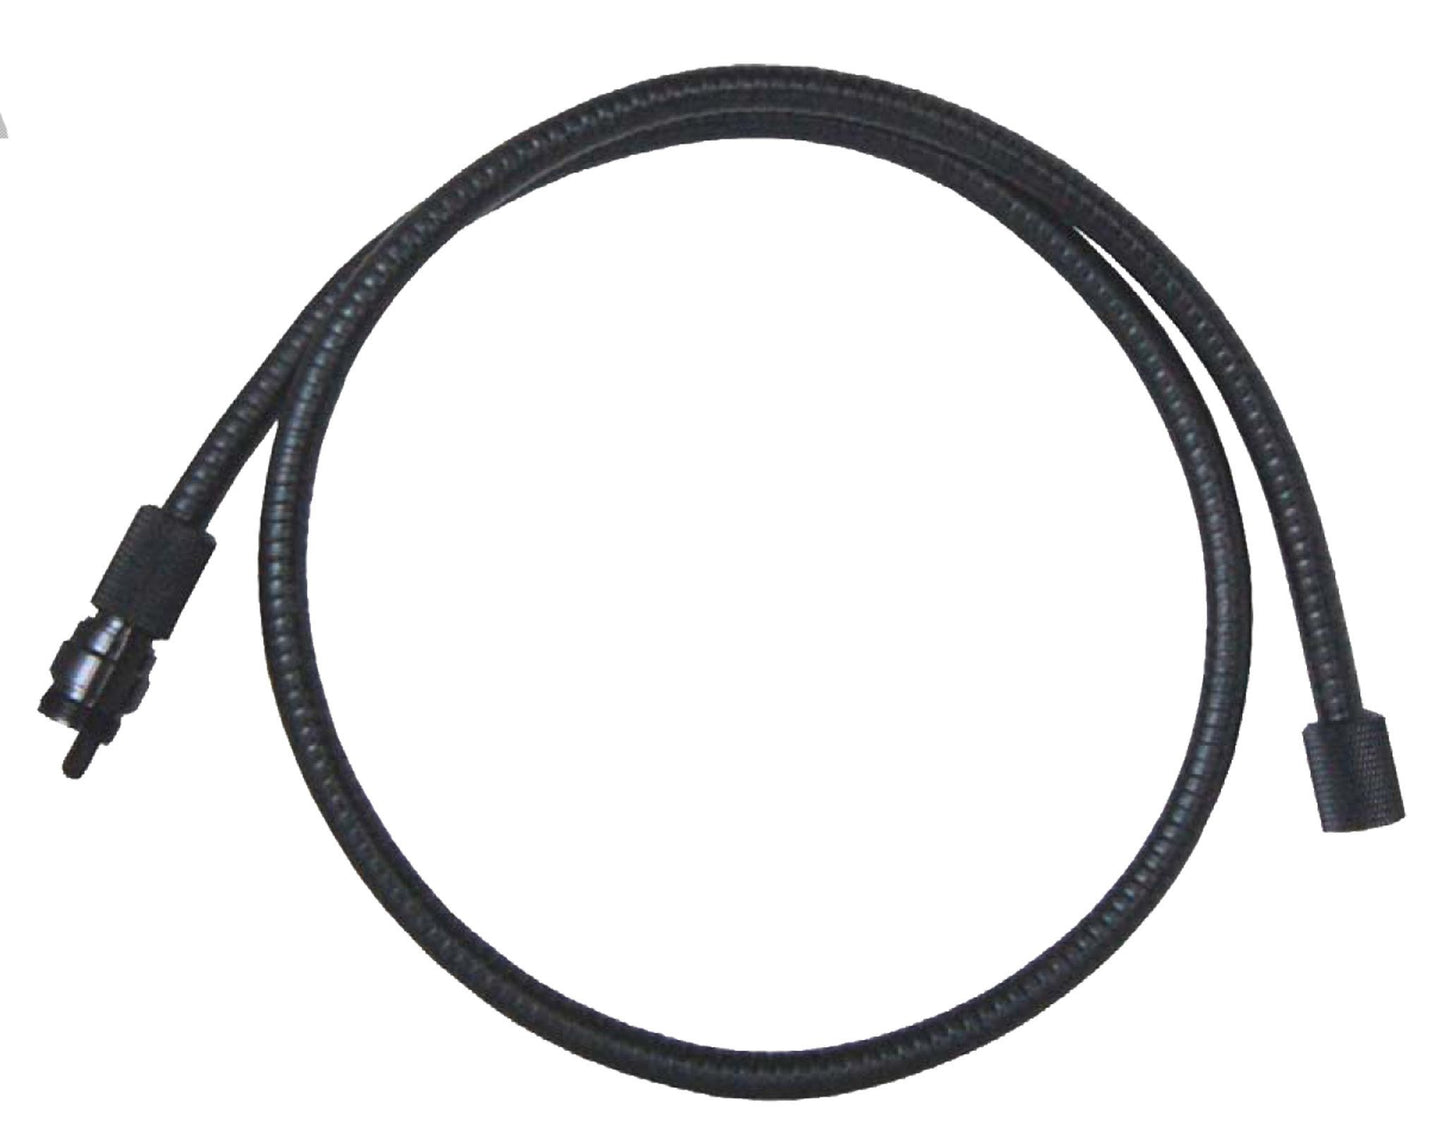 Extension for 9mm Inspection Camera, 3.3' Long - Whistler Group